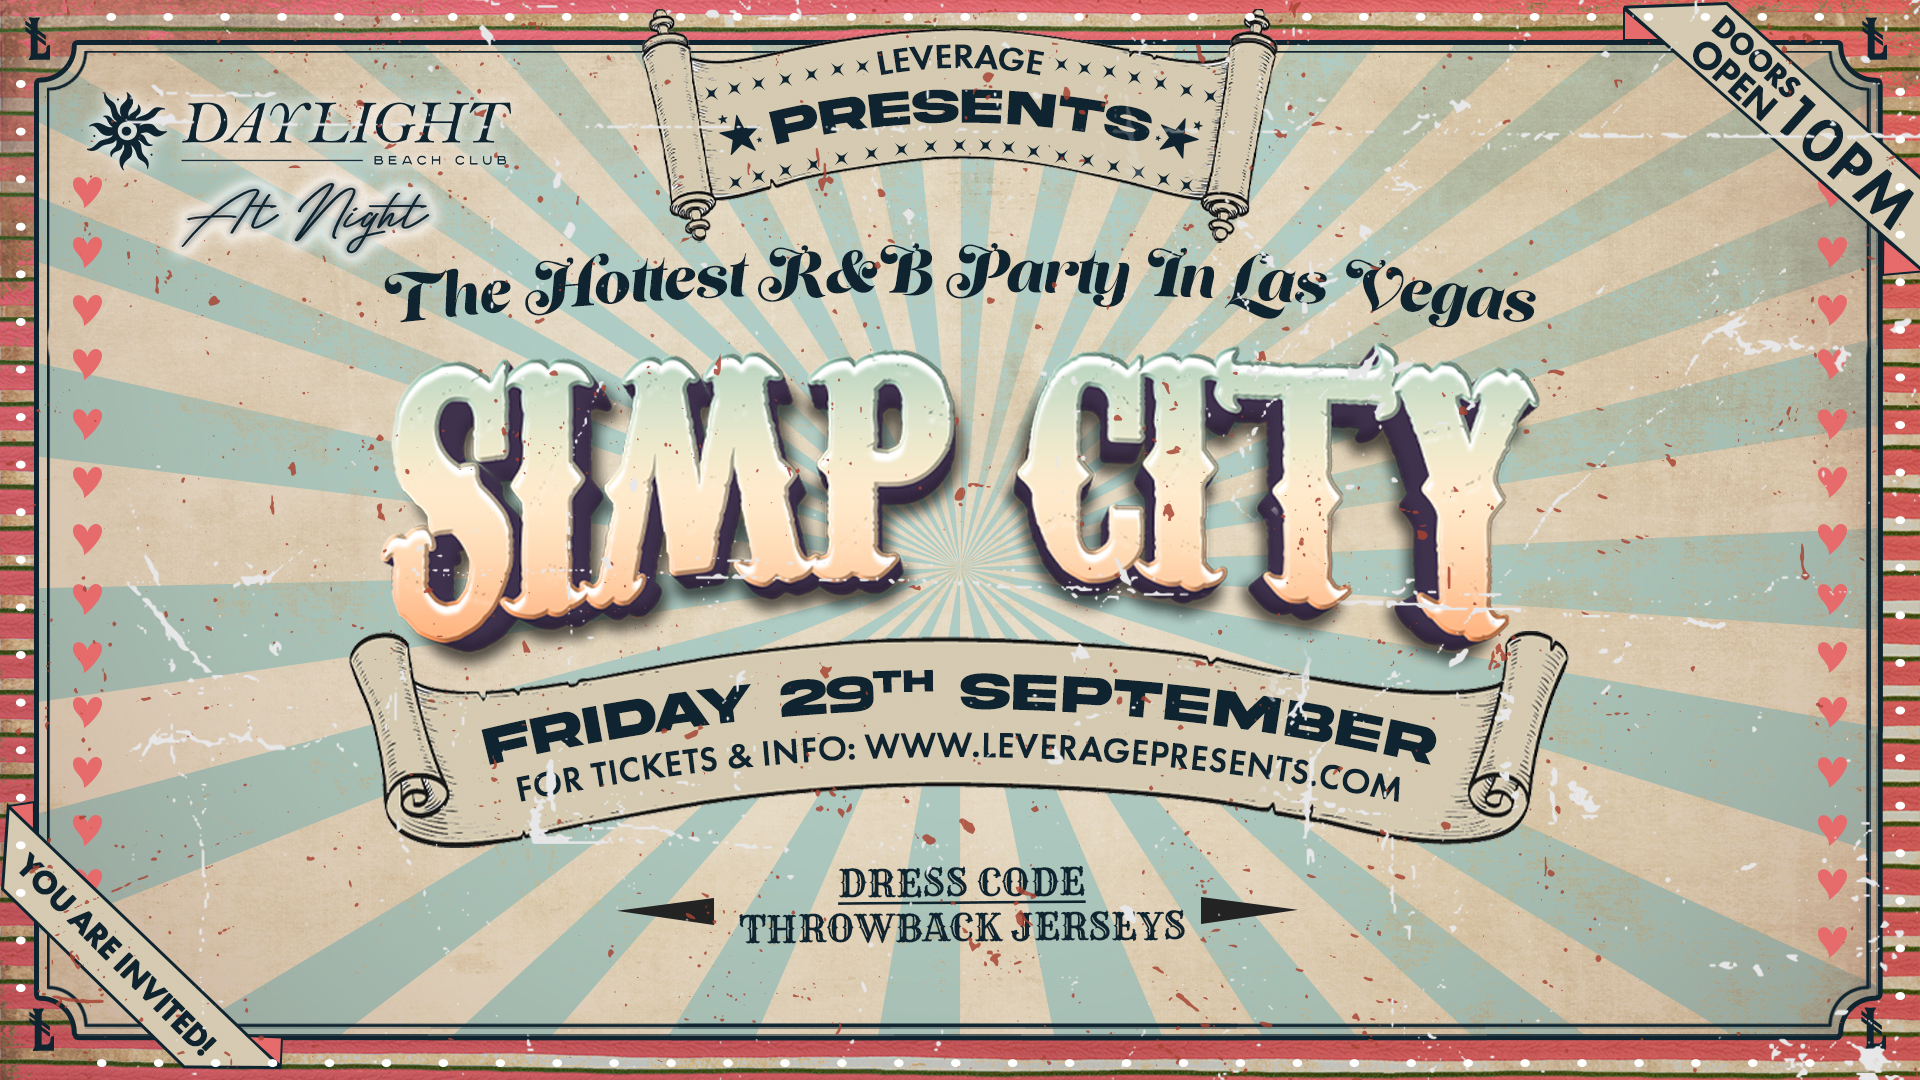 Don’t Miss The Final Simp City at DAYLIGHT